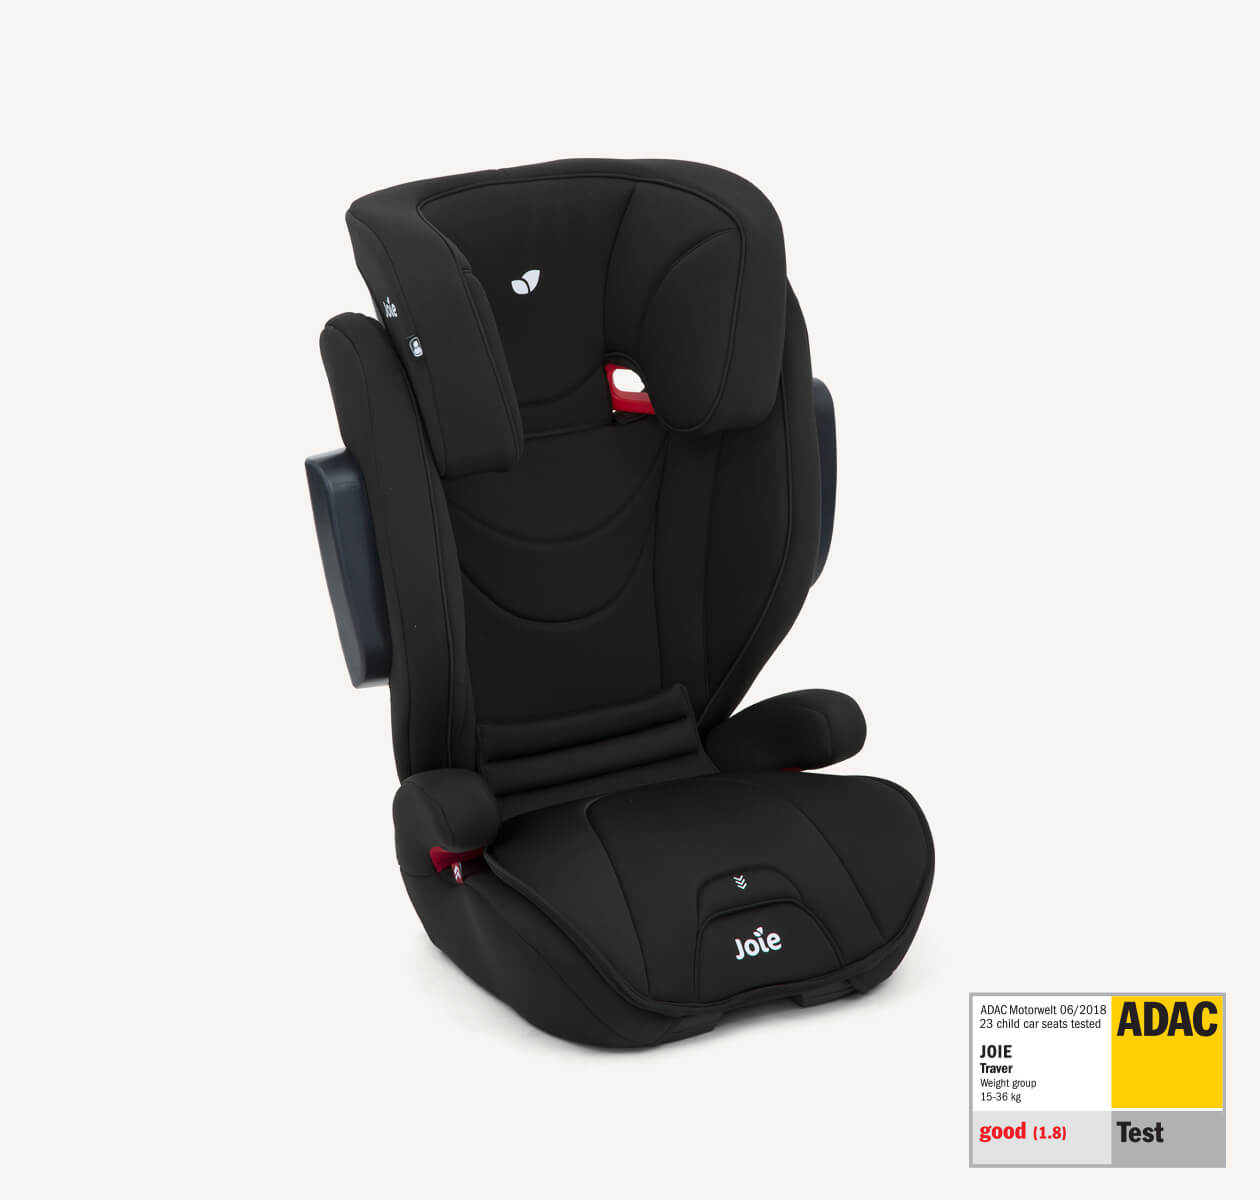 Joie traver booster seat in a black colour  on a right angle position, with the ADAC test label in the lower right corner.